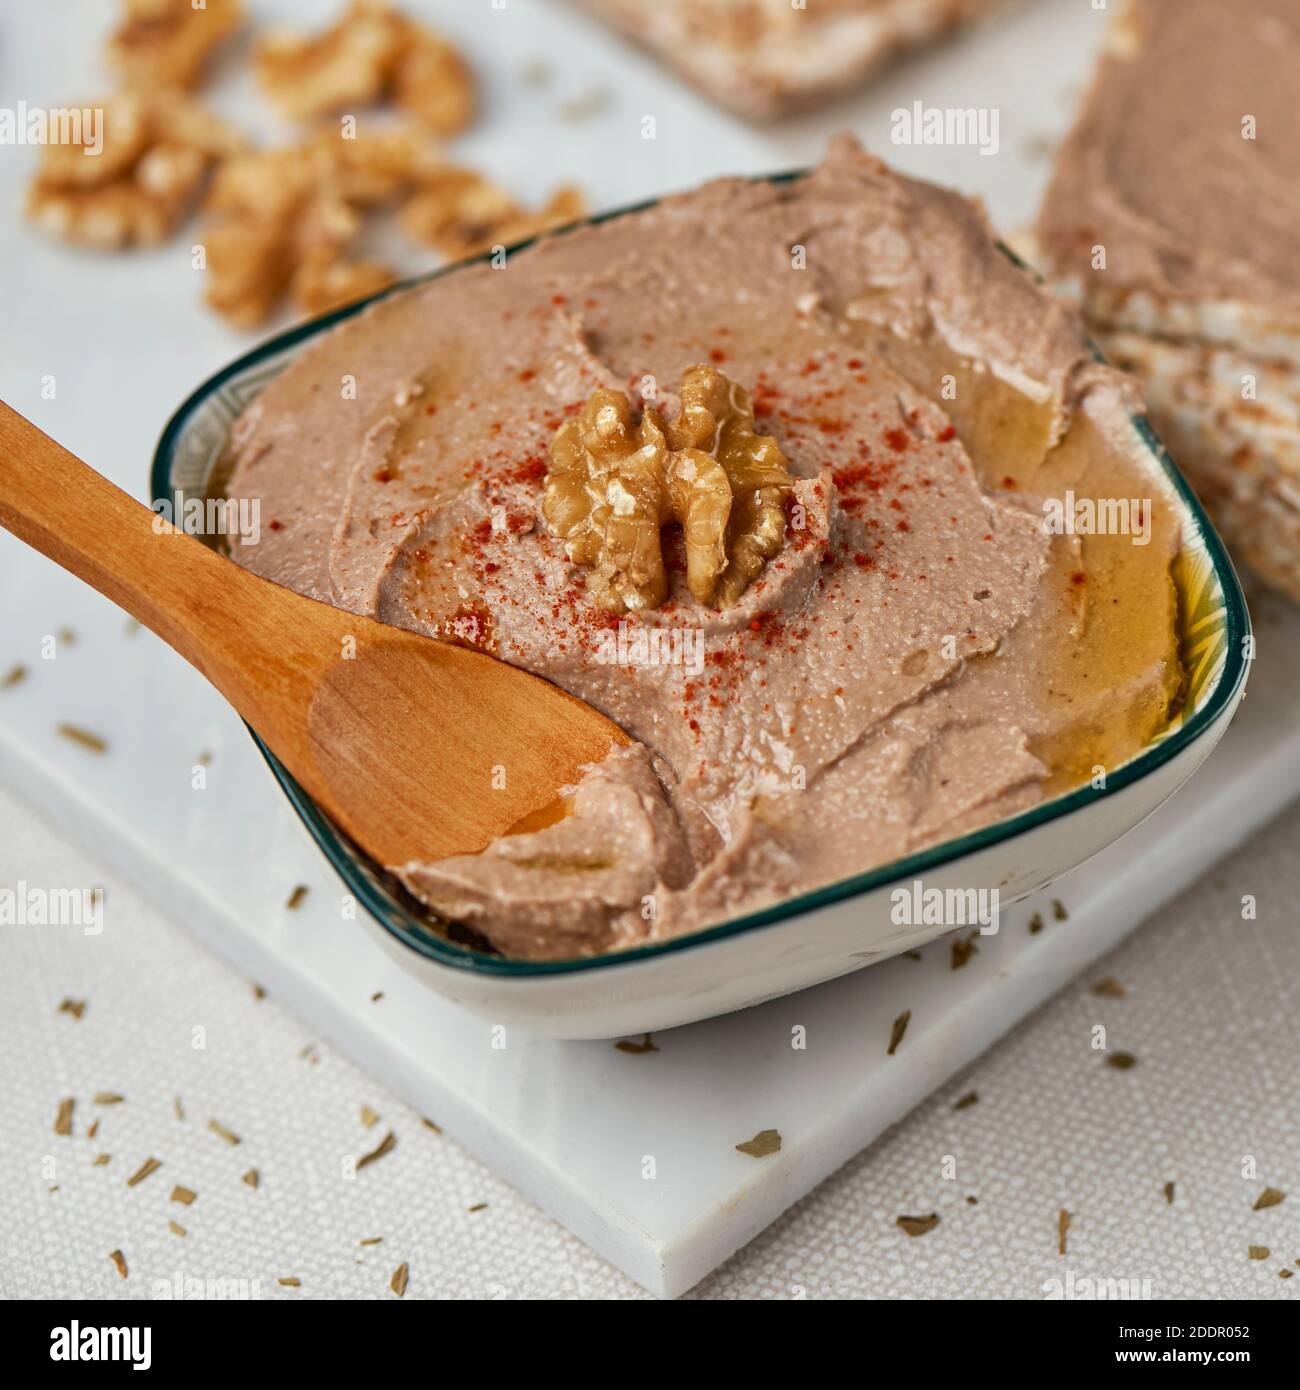 closeup of a bowl with an appetizing hummus, made with chickpea, walnut and rosemary, on a table, next to some puffed rice cakes Stock Photo